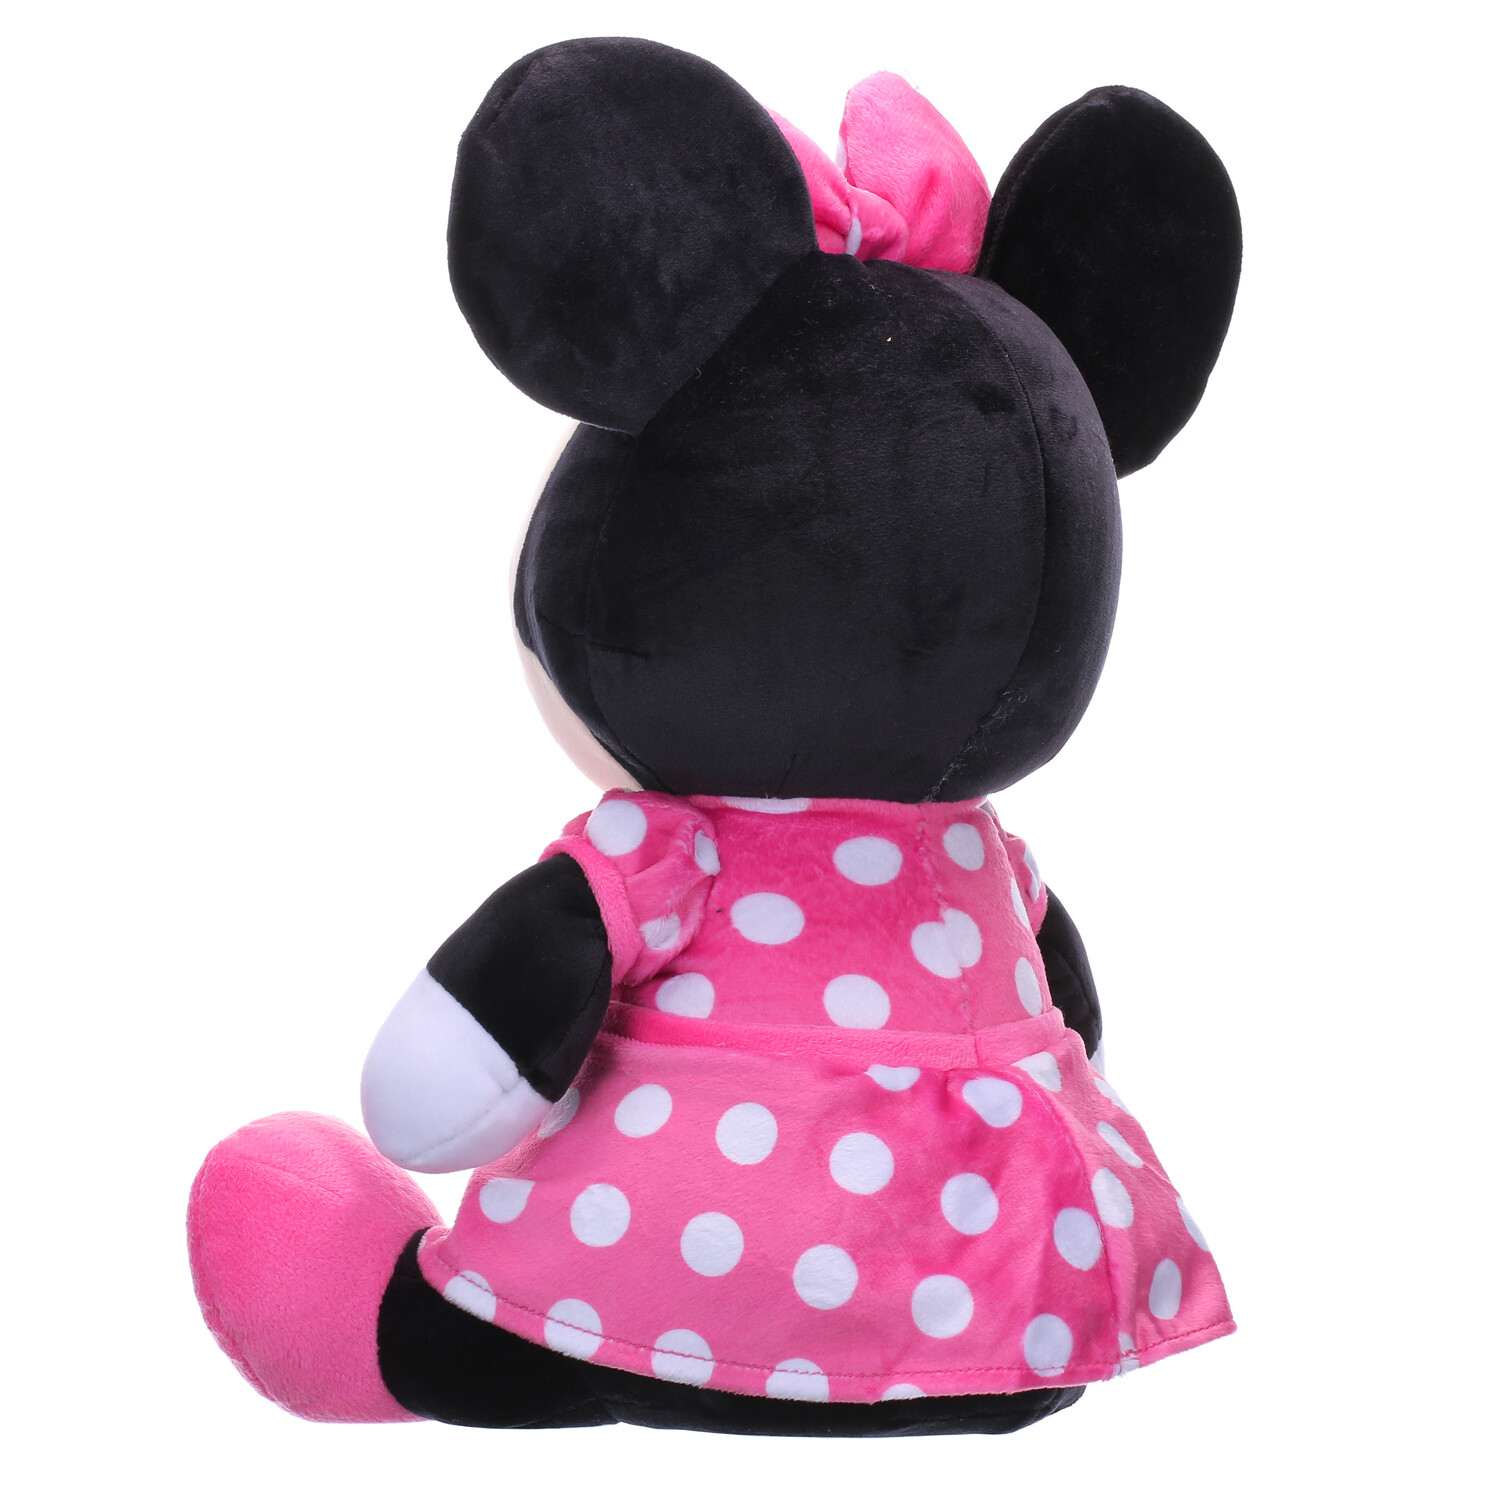 2021 Disney Parks Weighted Emotional Support Plush Minnie Mouse